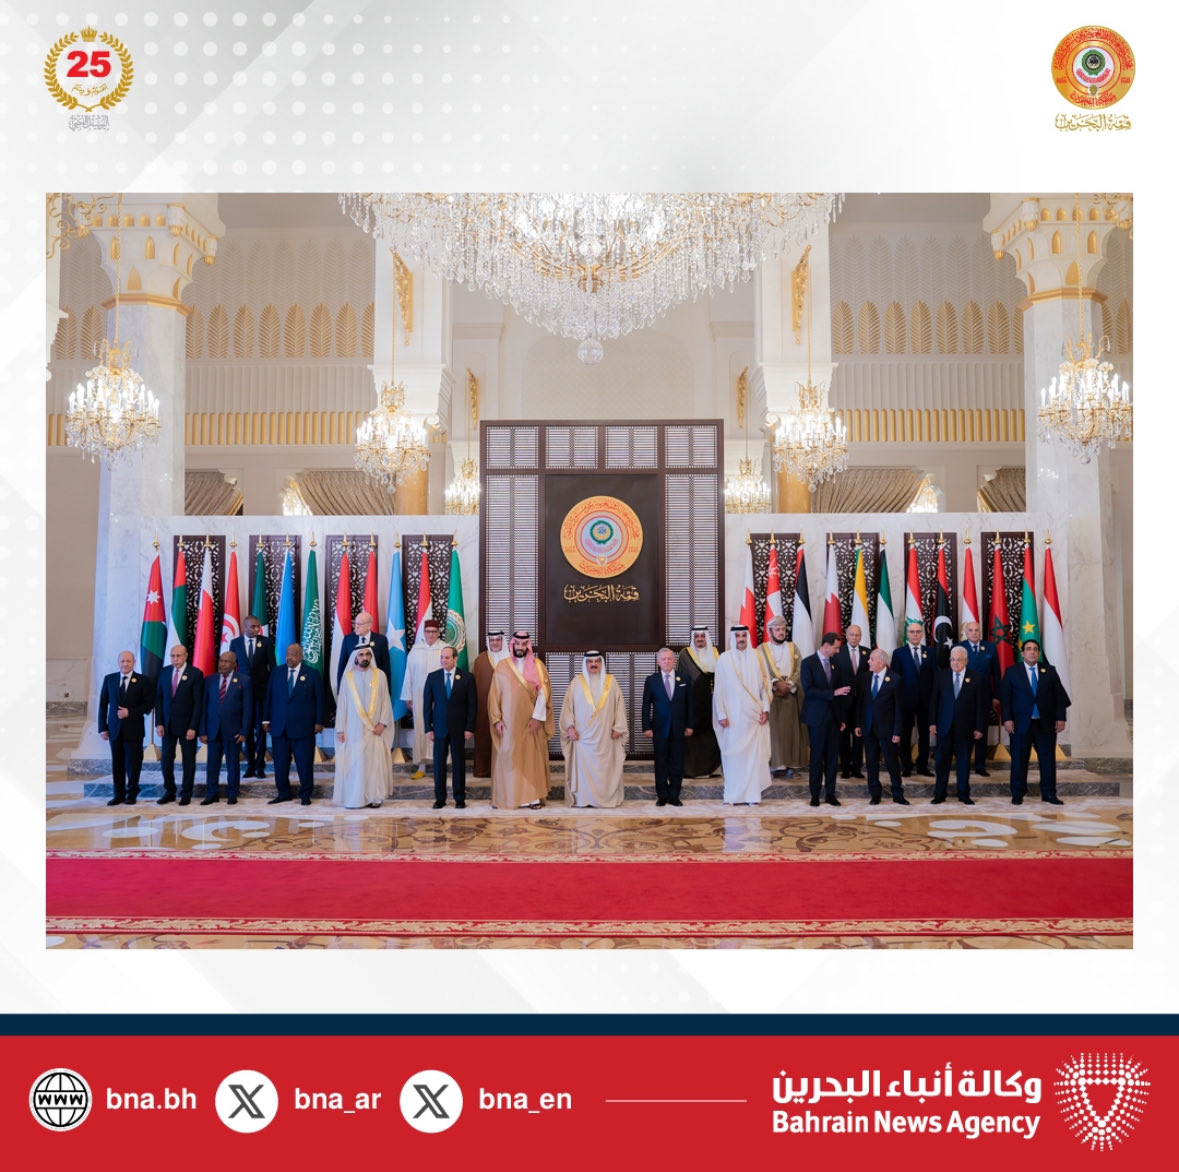 The 33rd #ArabSummit is officially underway in the Kingdom of #Bahrain . Looking forward to seeing leaders come together and working to solve the critical regional issues at hand.